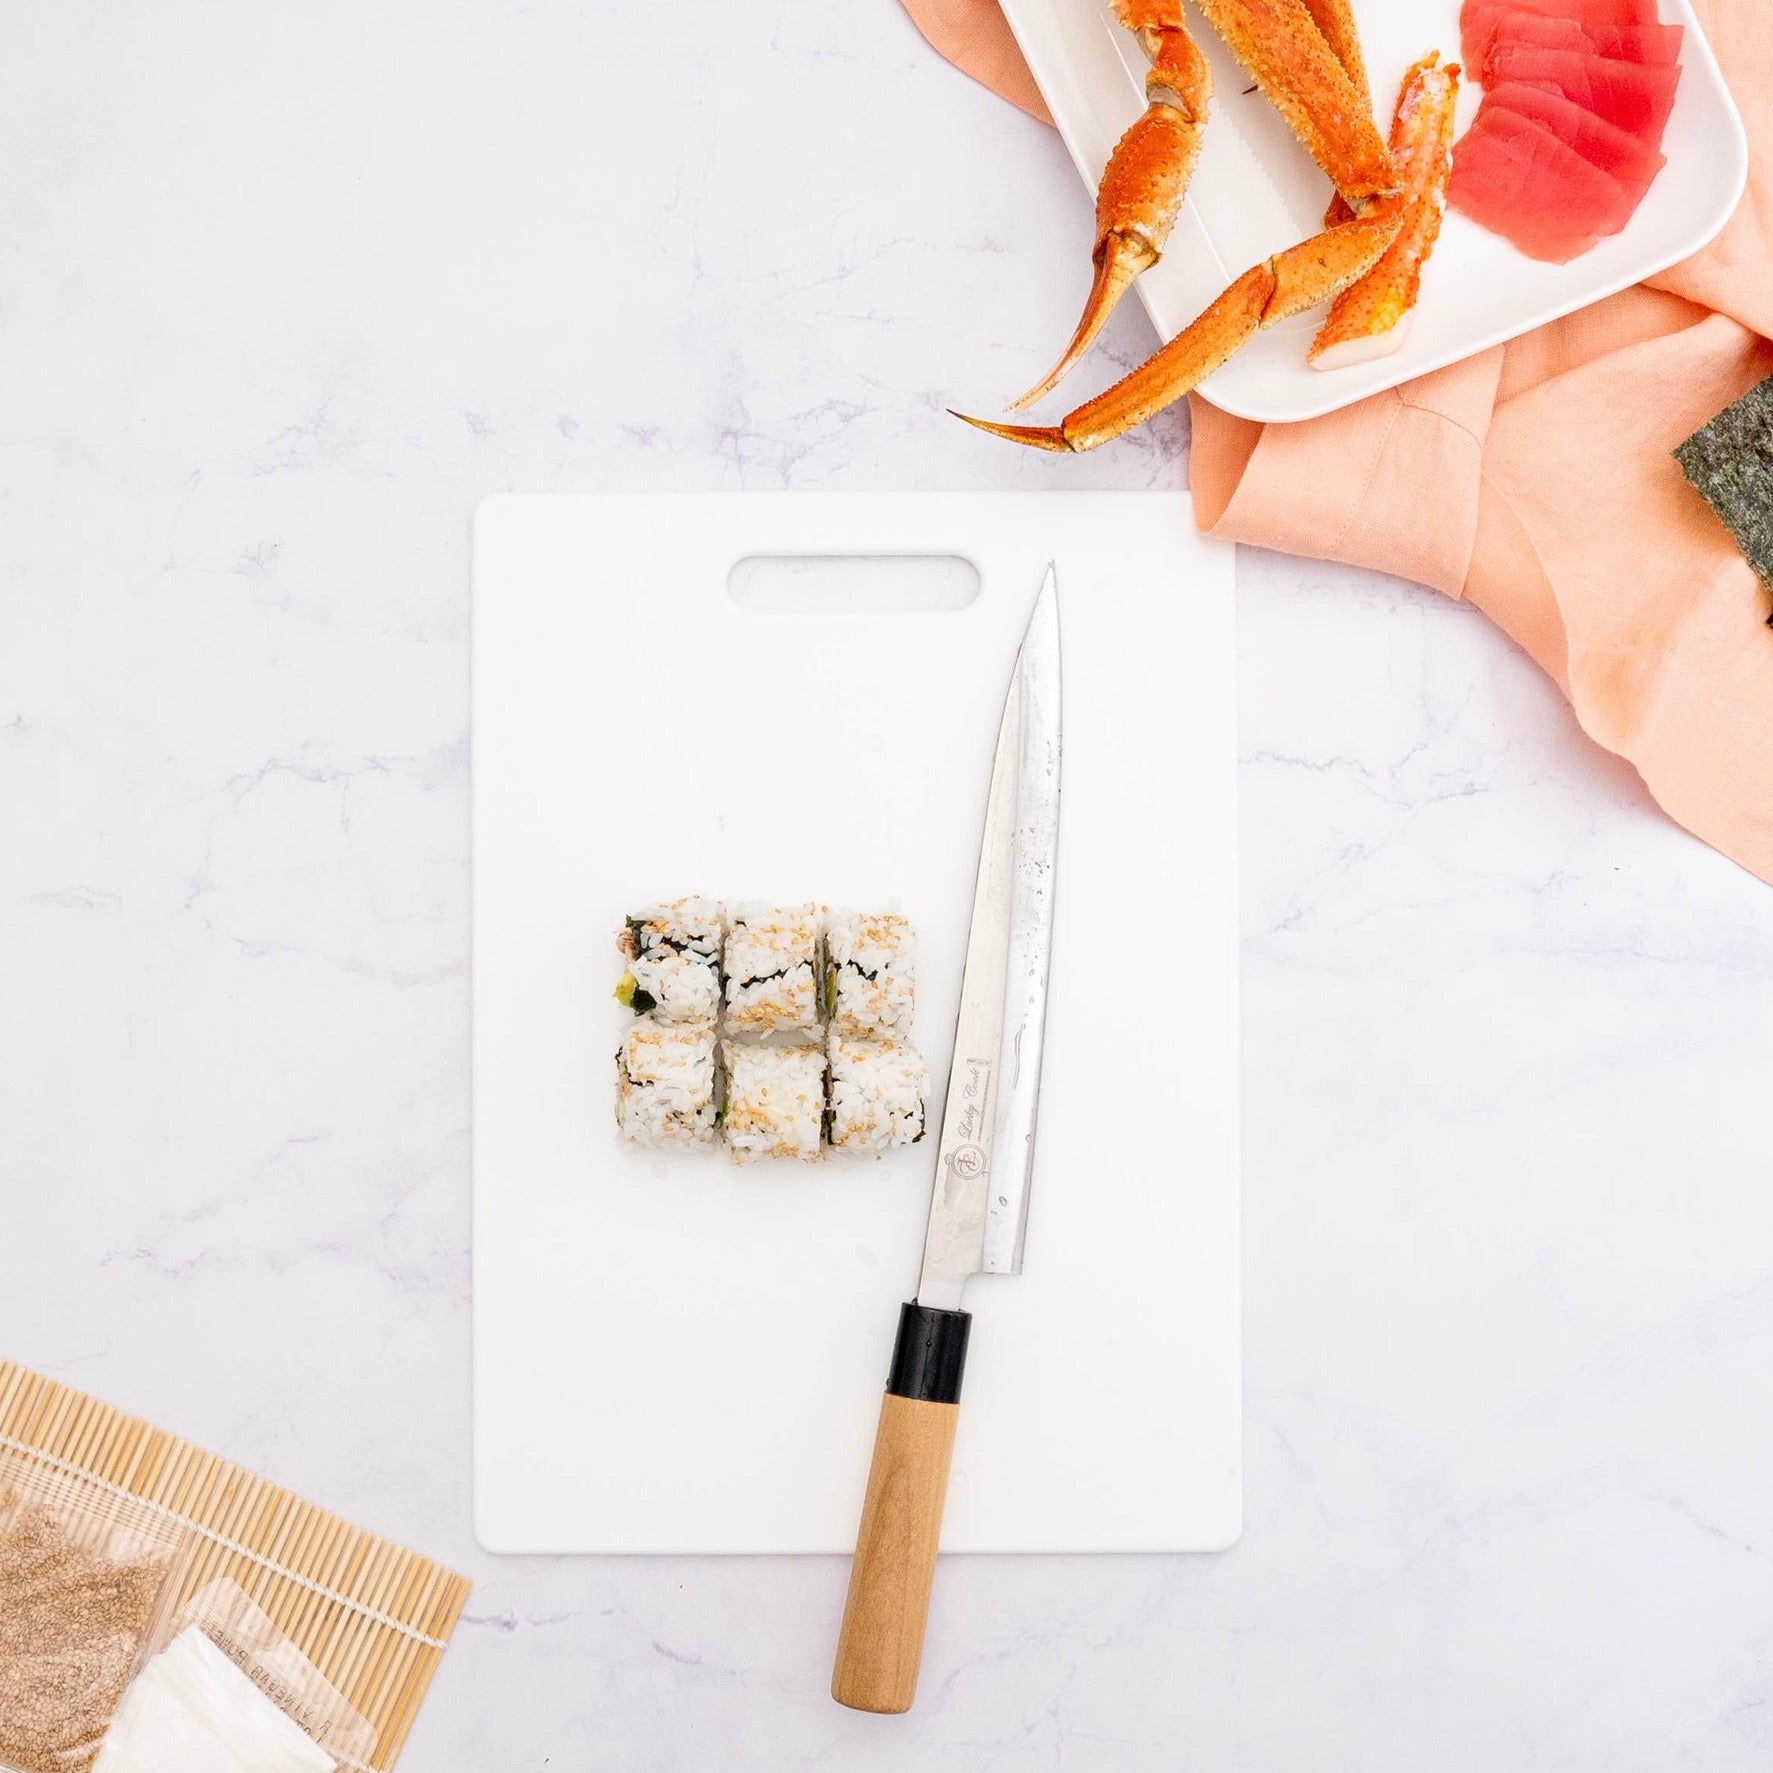 DIY Sushi Roll Making Kit Gift for Kids Interested in Culinary Arts • A  Family Lifestyle & Food Blog